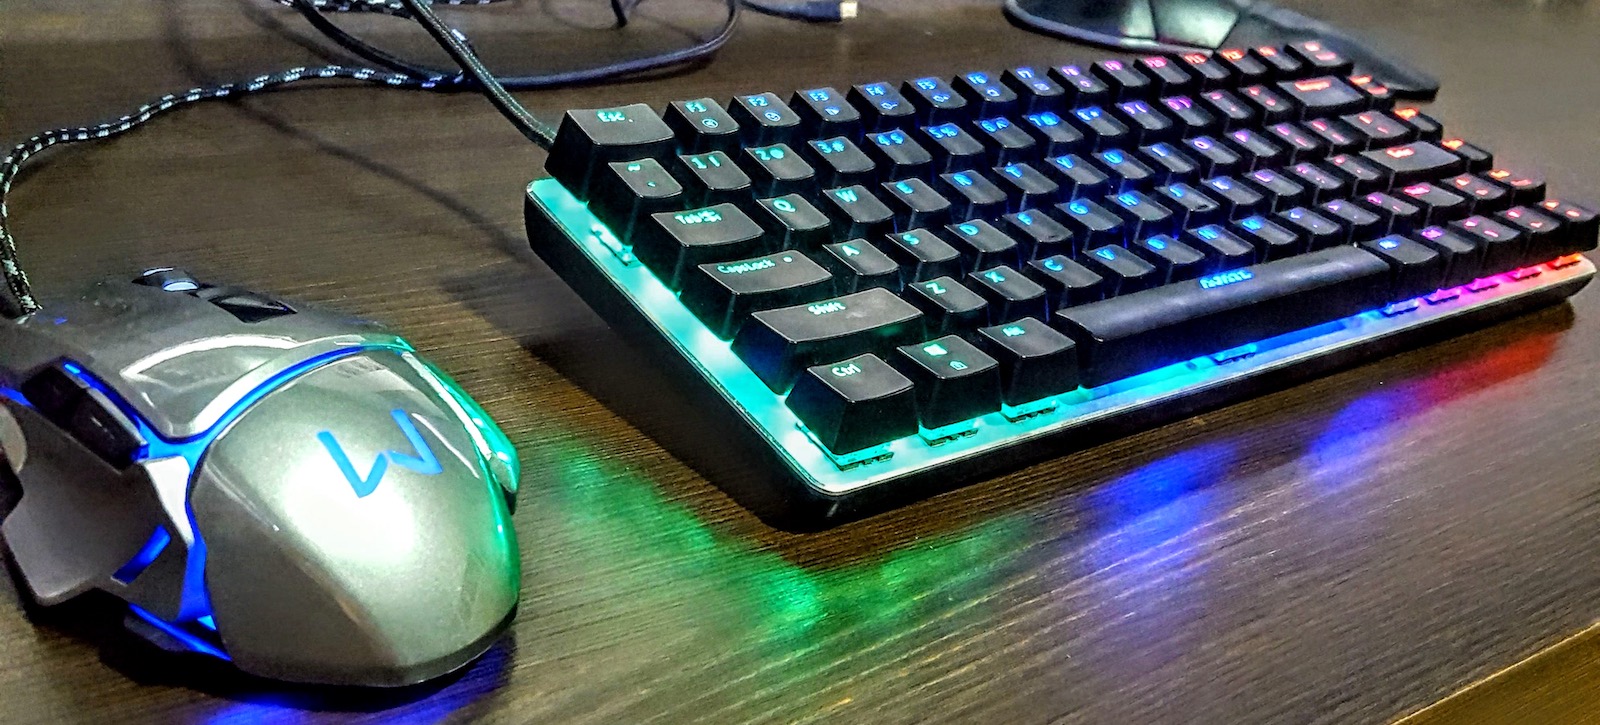 Figure 2: Typical gamer setup, full of lights, chrome and colors.